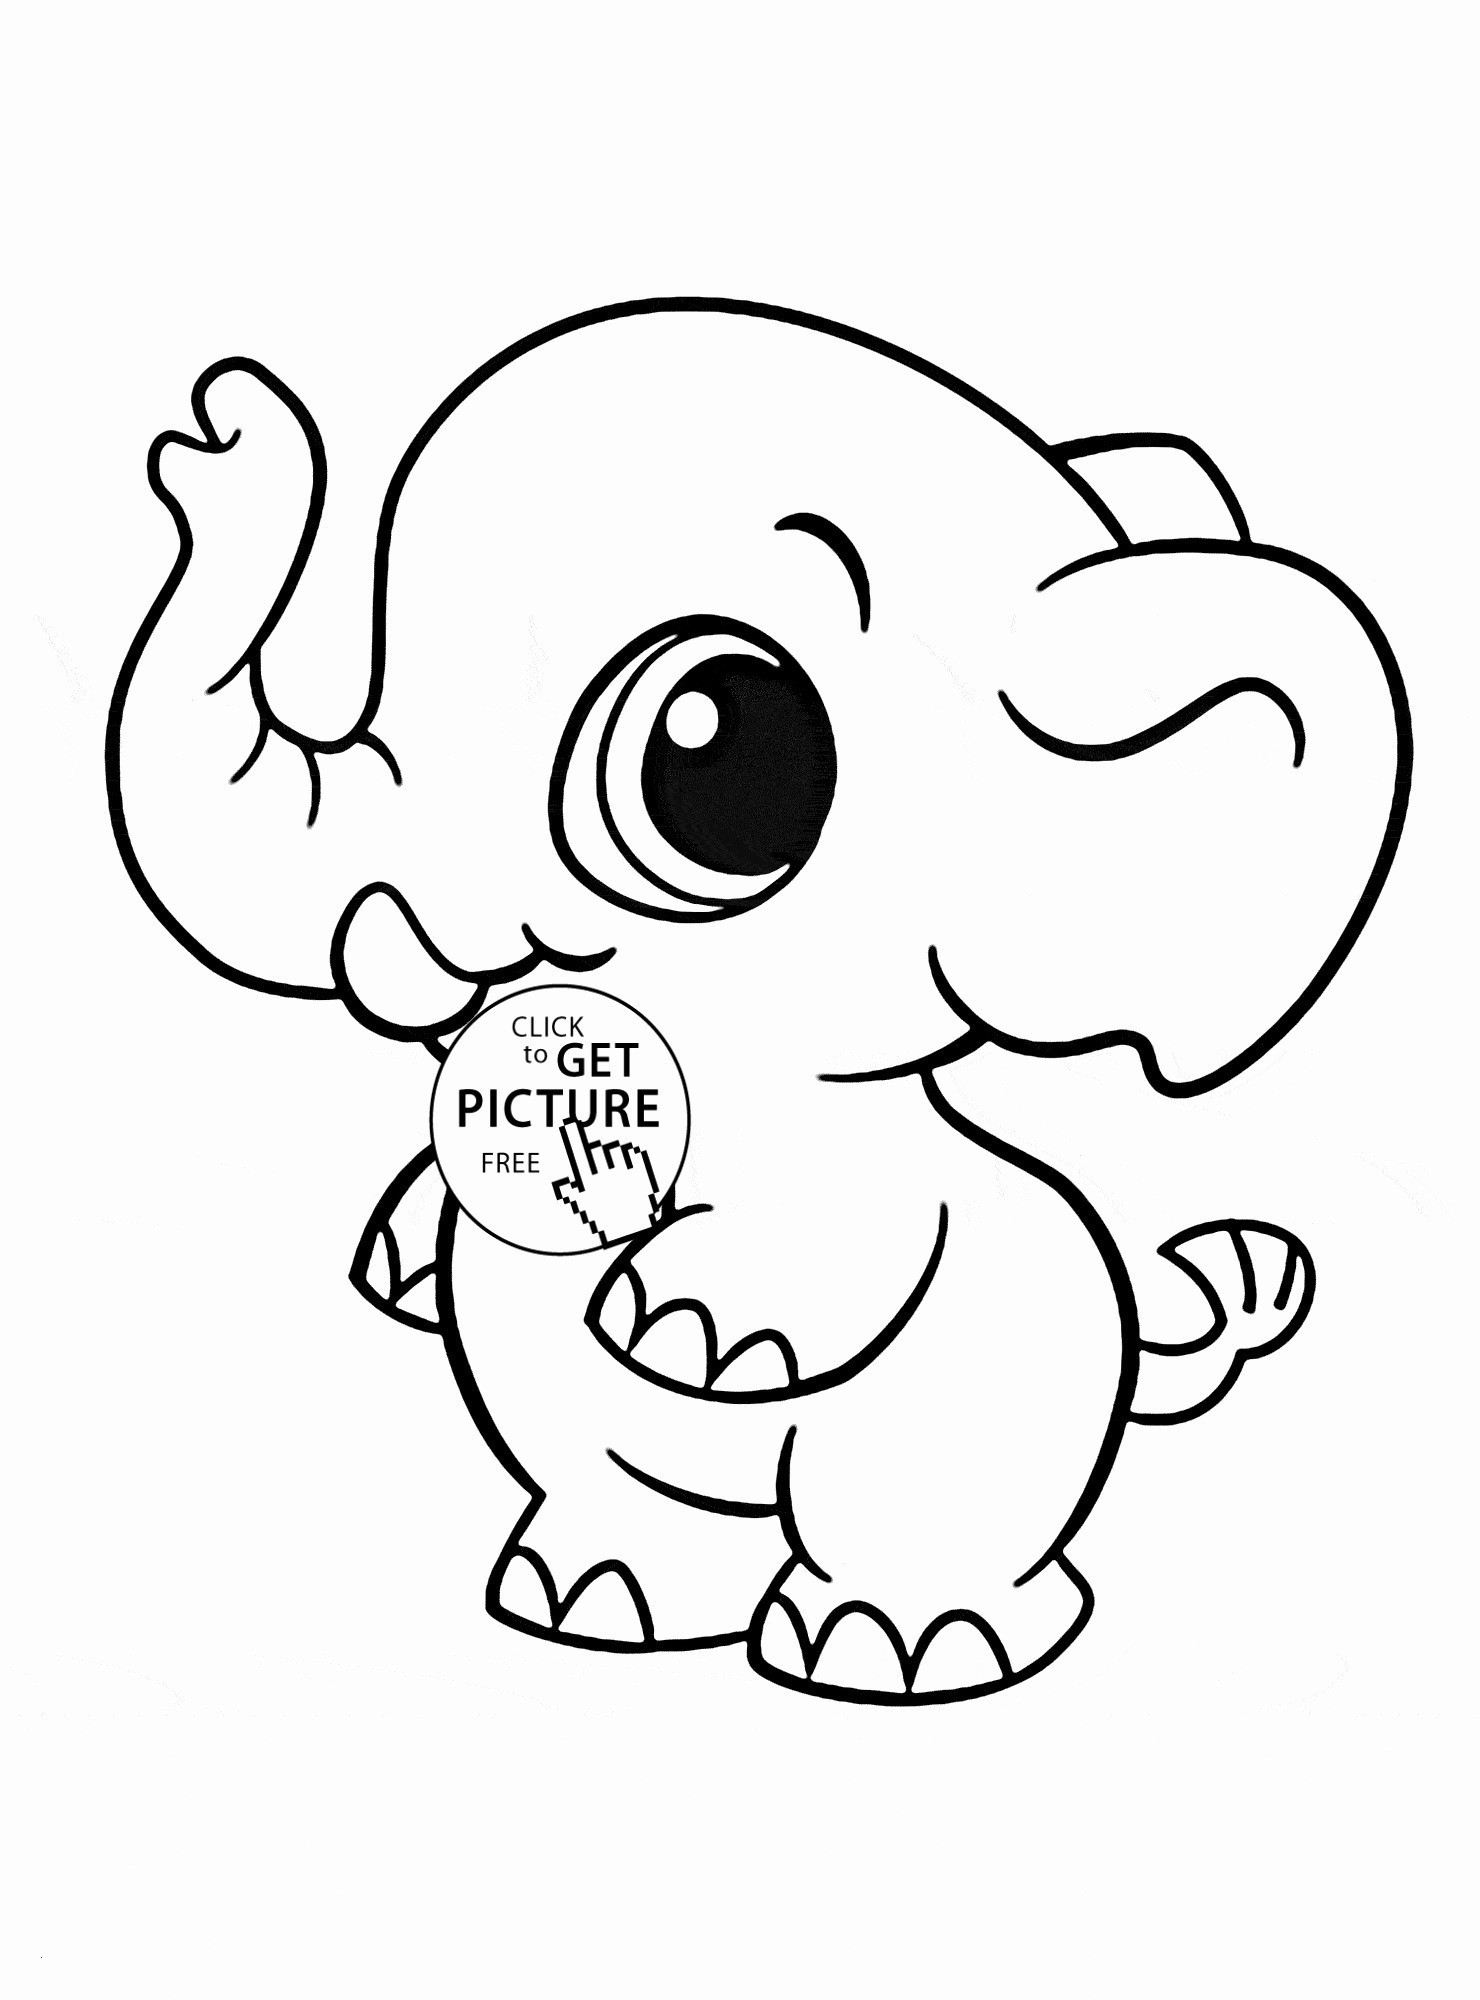 Elephant Coloring Pages Beautiful 18elegant Elephant Coloring Book Clip Arts & Coloring Pages